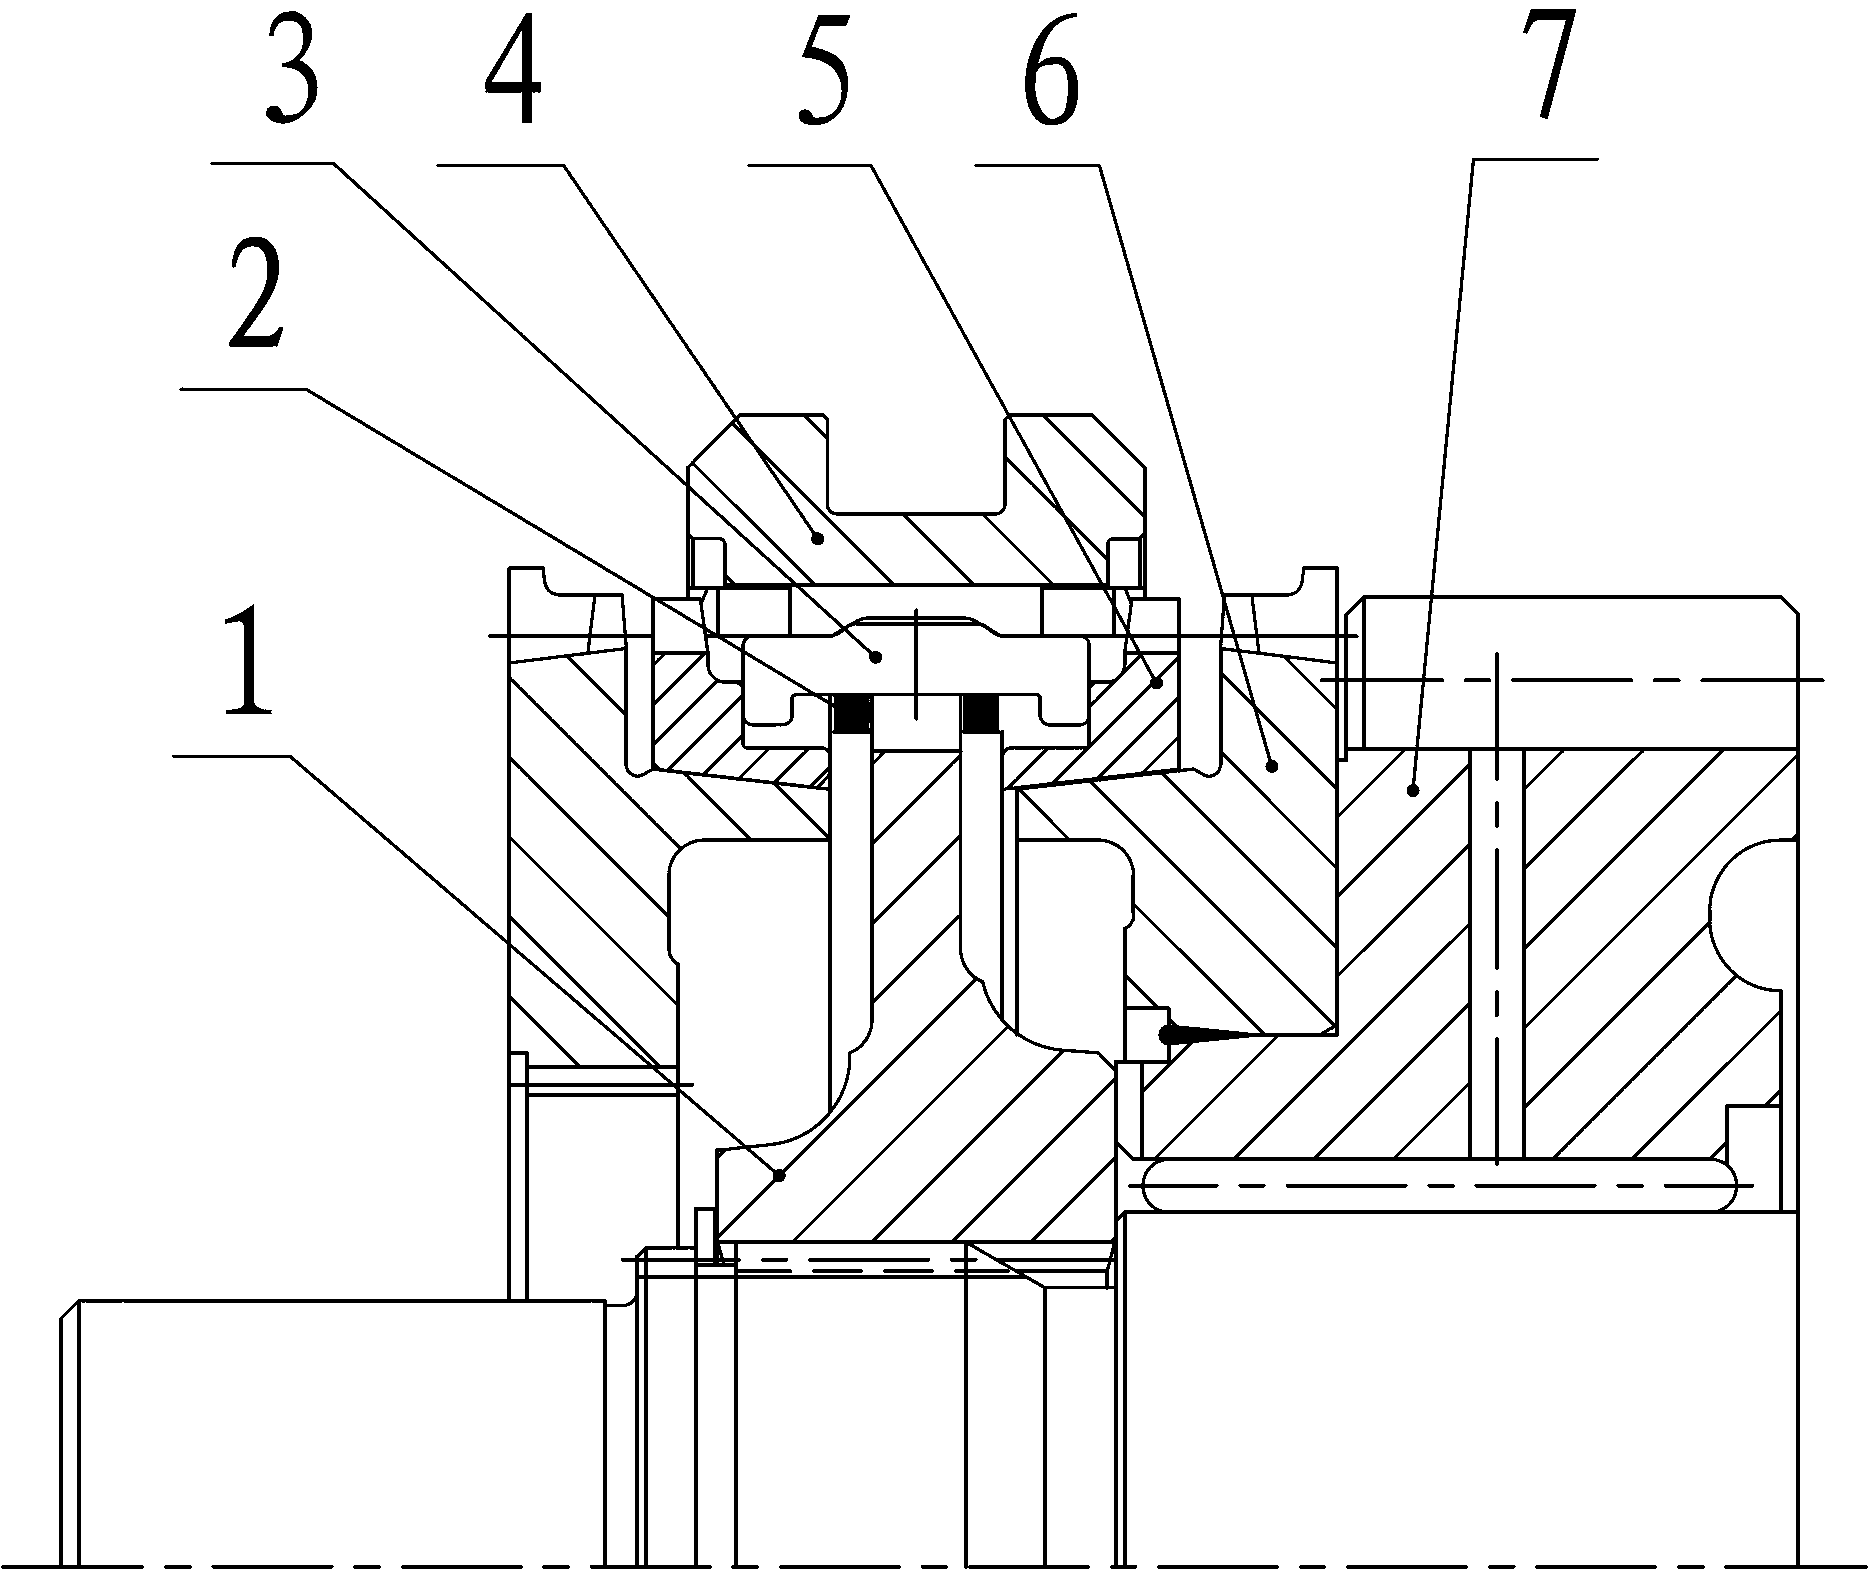 Synchronizer structure capable of preventing secondary impact during gear shift